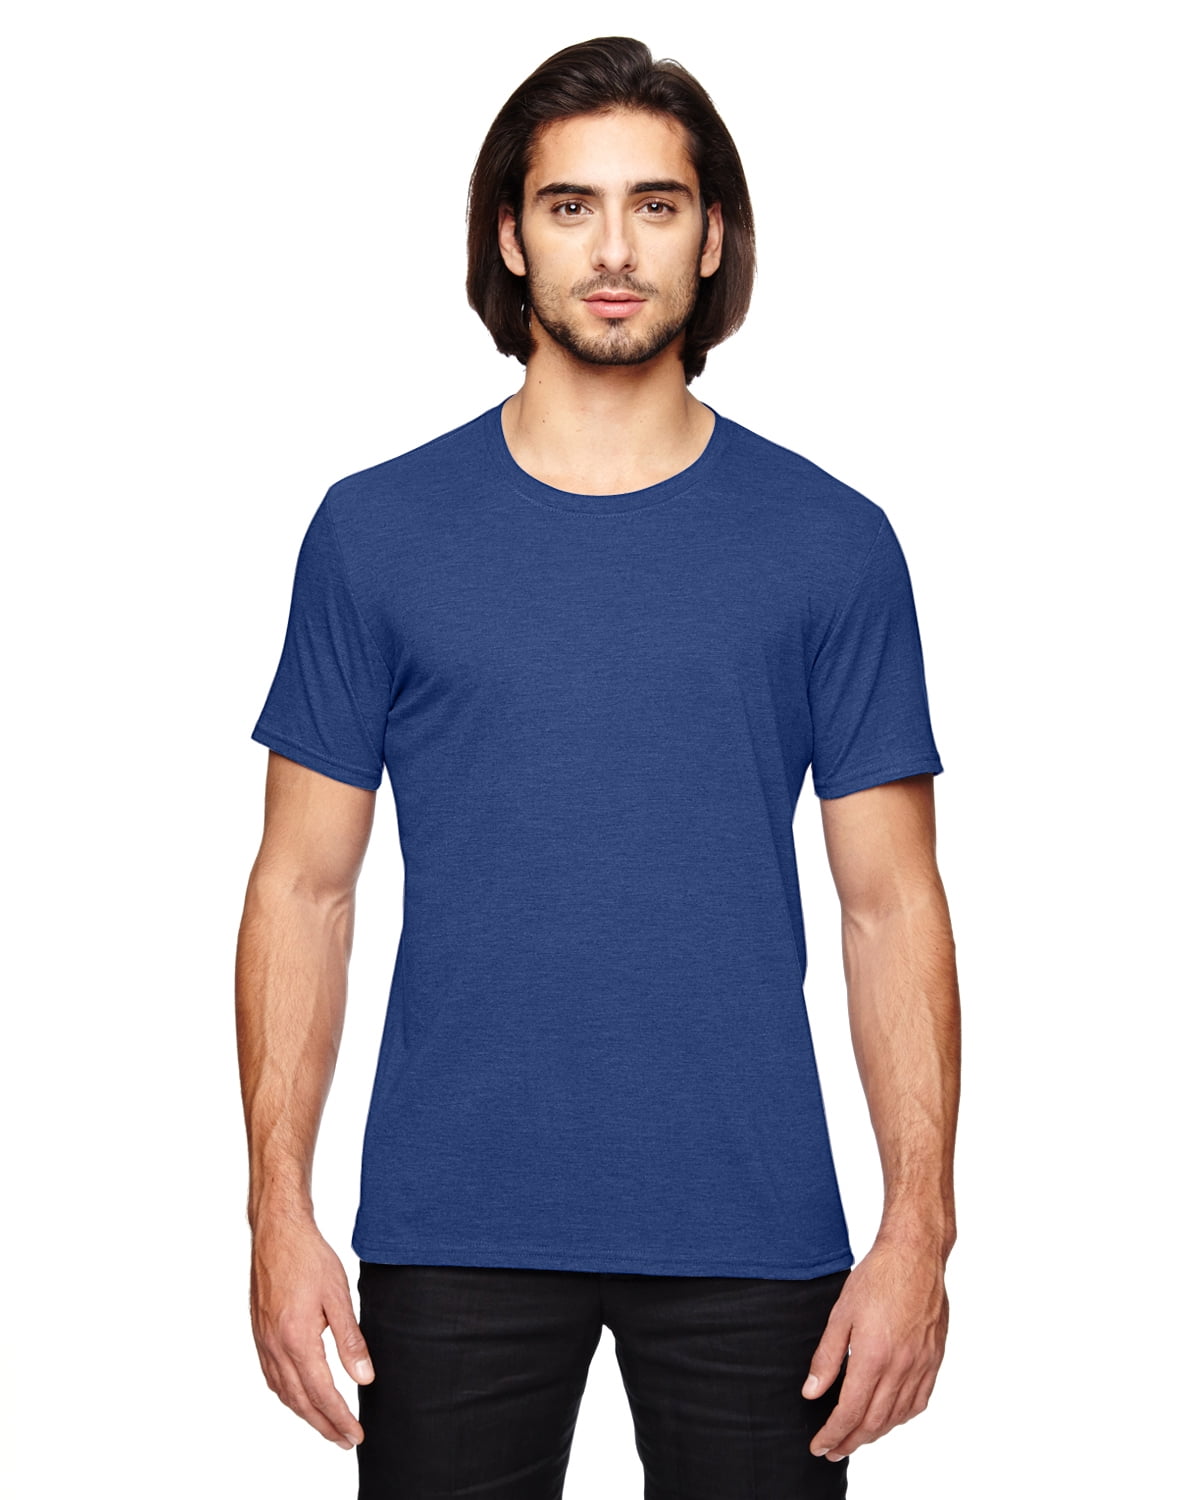 JustBlanks Men's Regular T Shirt Short Sleeve Tri-Blend Tee  Poly-Cotton-rayon Double Needle Sleeves Jersey Crew Neck Tee for Men -  HEATHER BLUE - 3X-Large